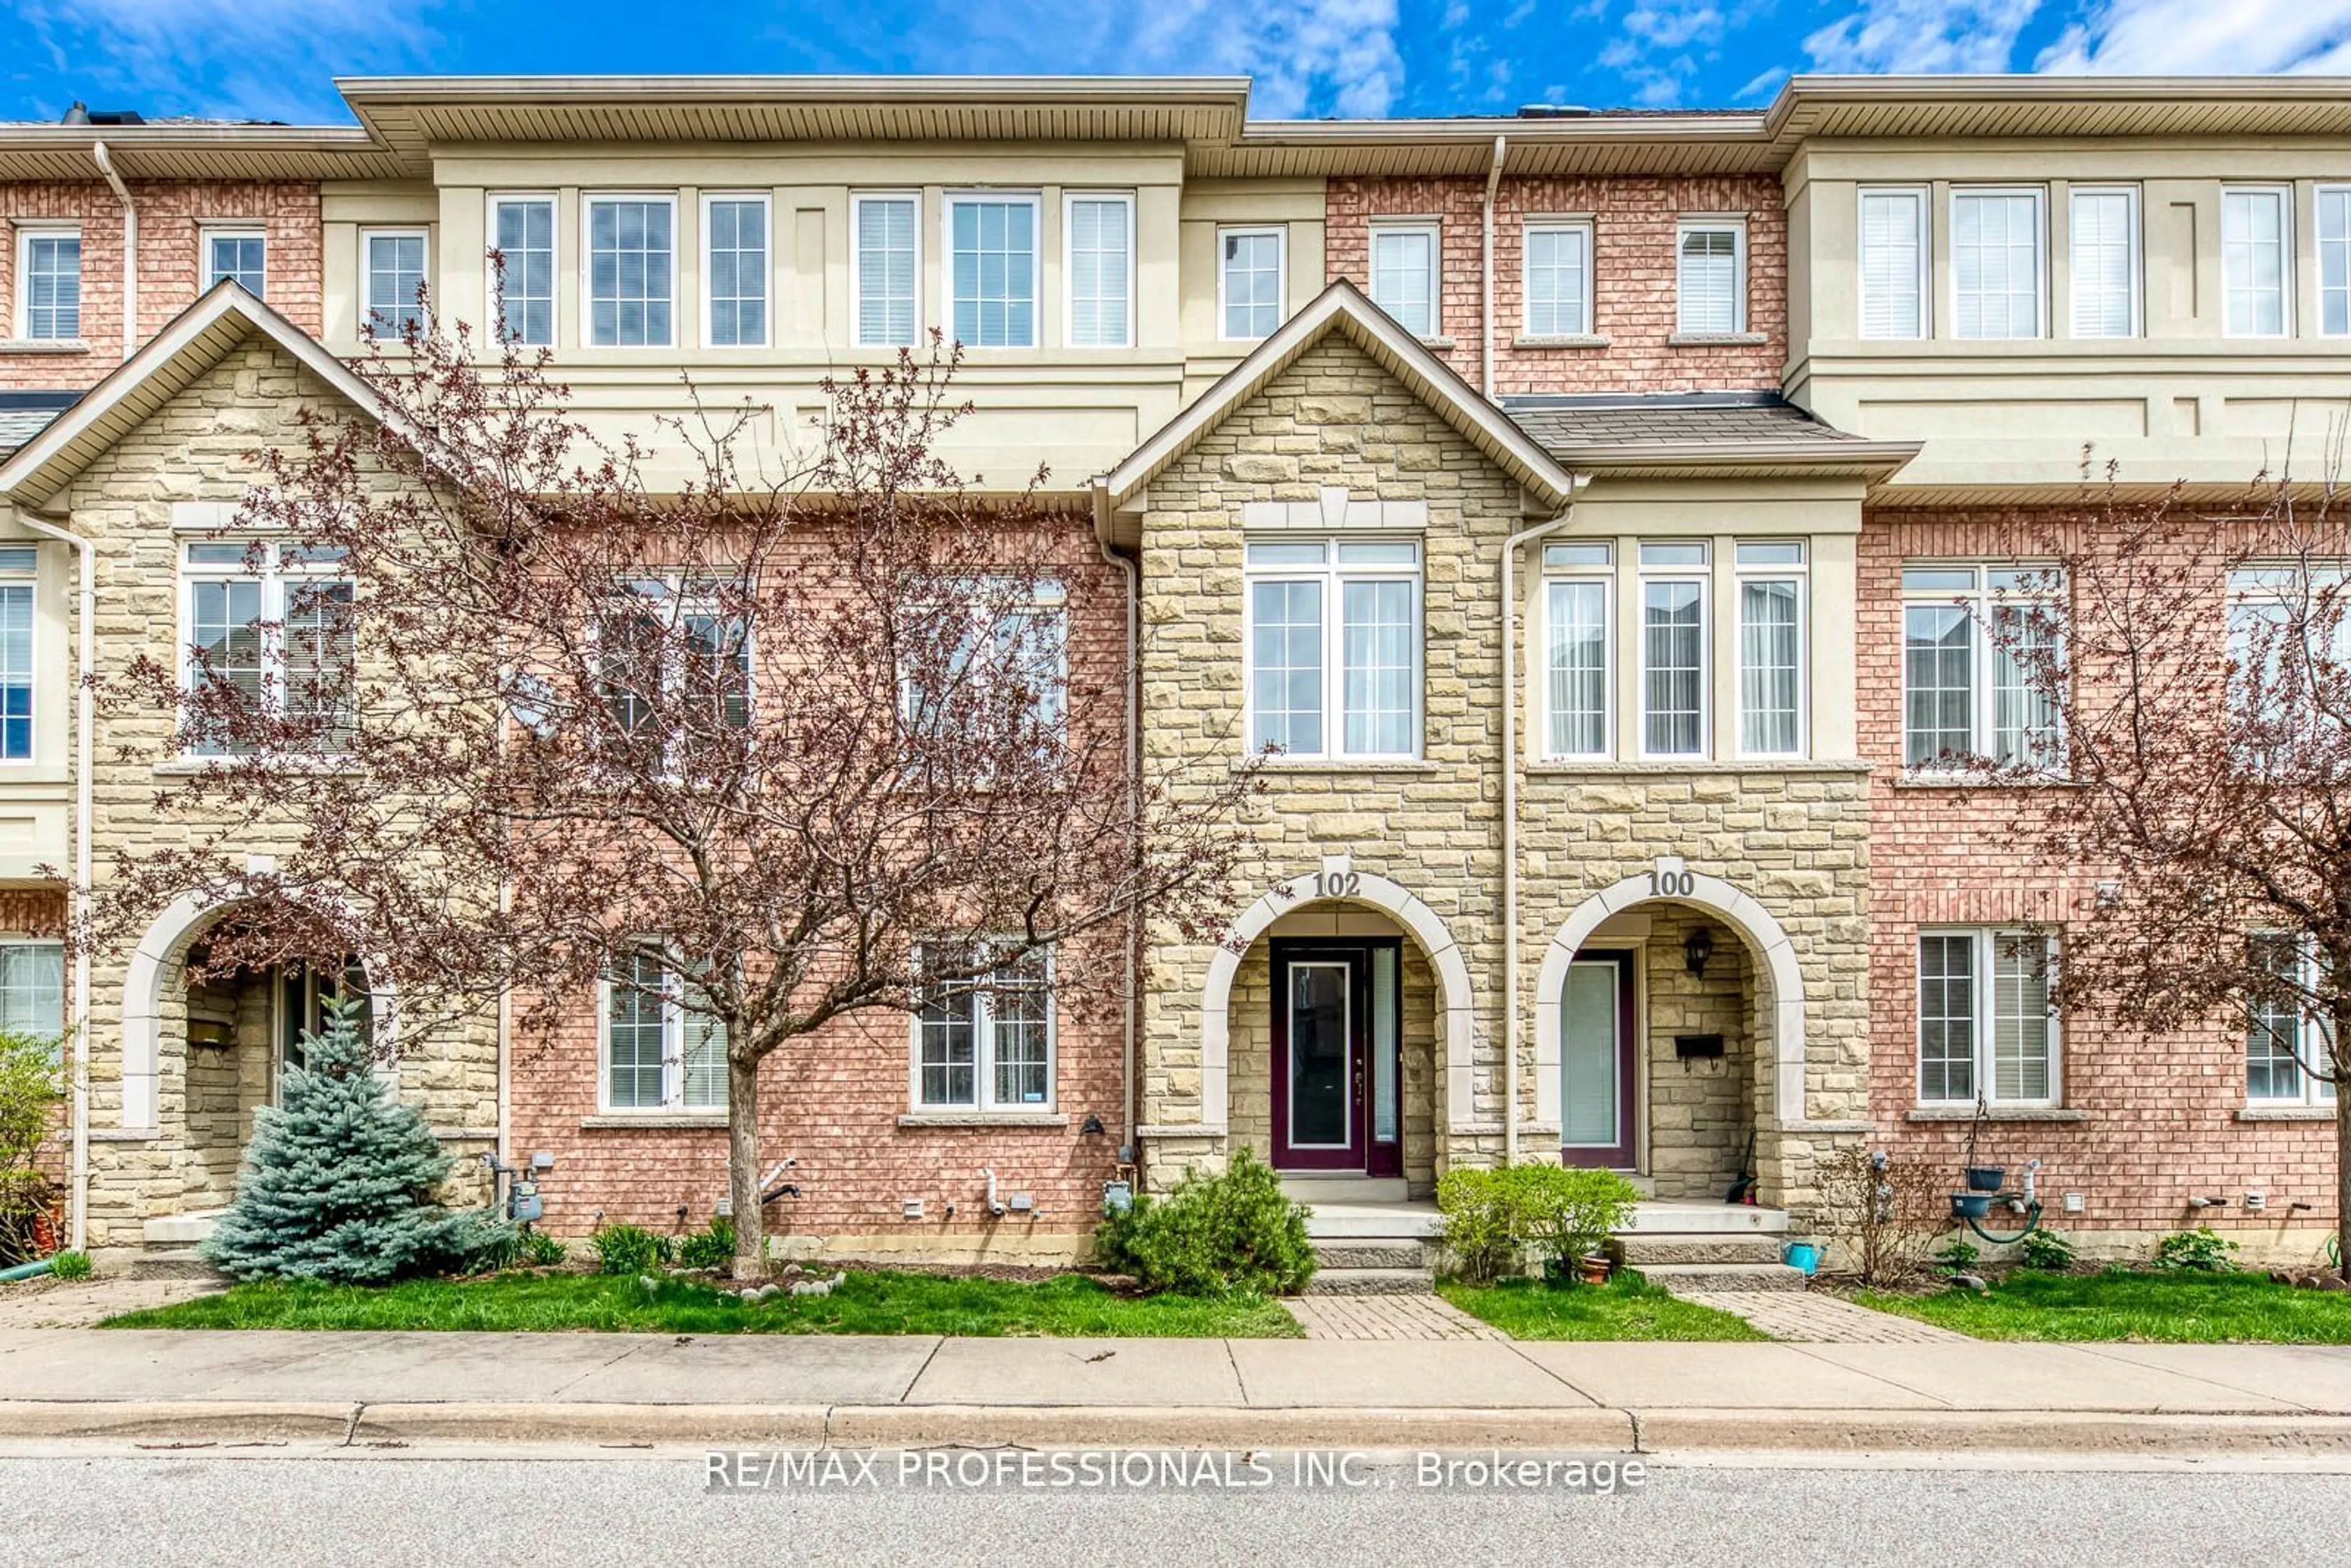 Home with brick exterior material for 102 Ramage Lane, Toronto Ontario M9C 5S6